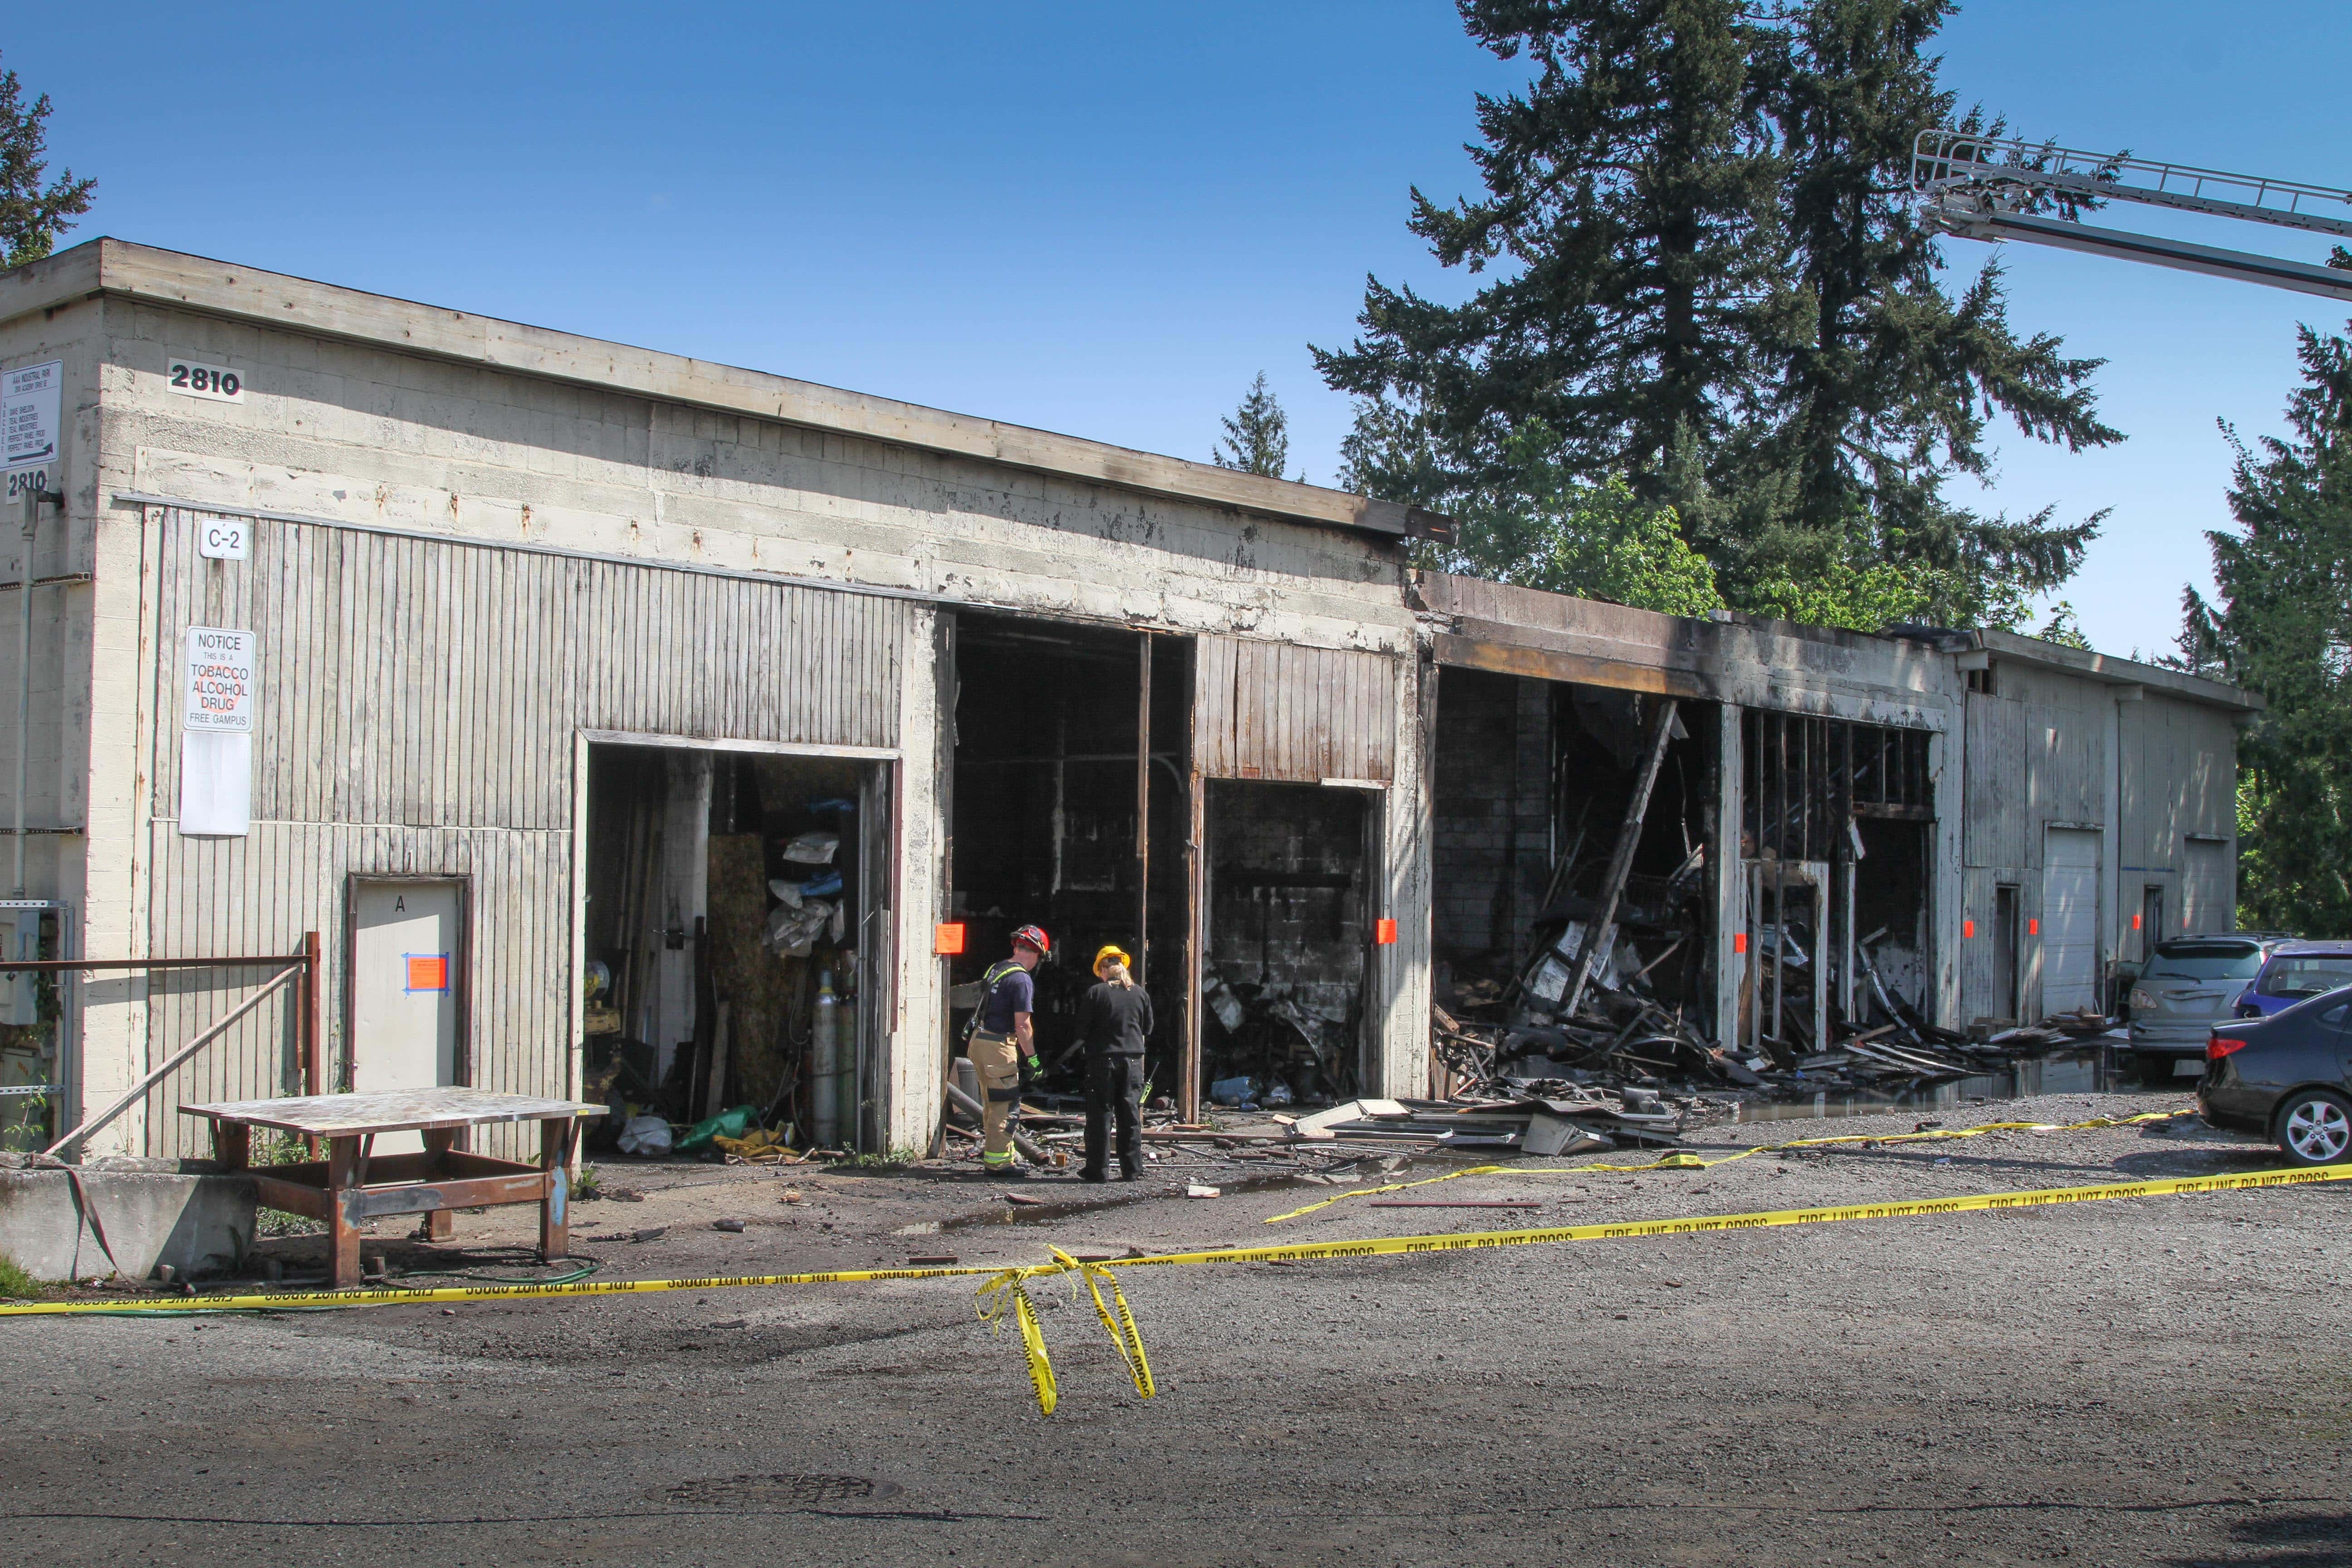 Firefighters inspecting the charred shell of the warehouse on Friday, May 8. (Heidi Baumgartner)